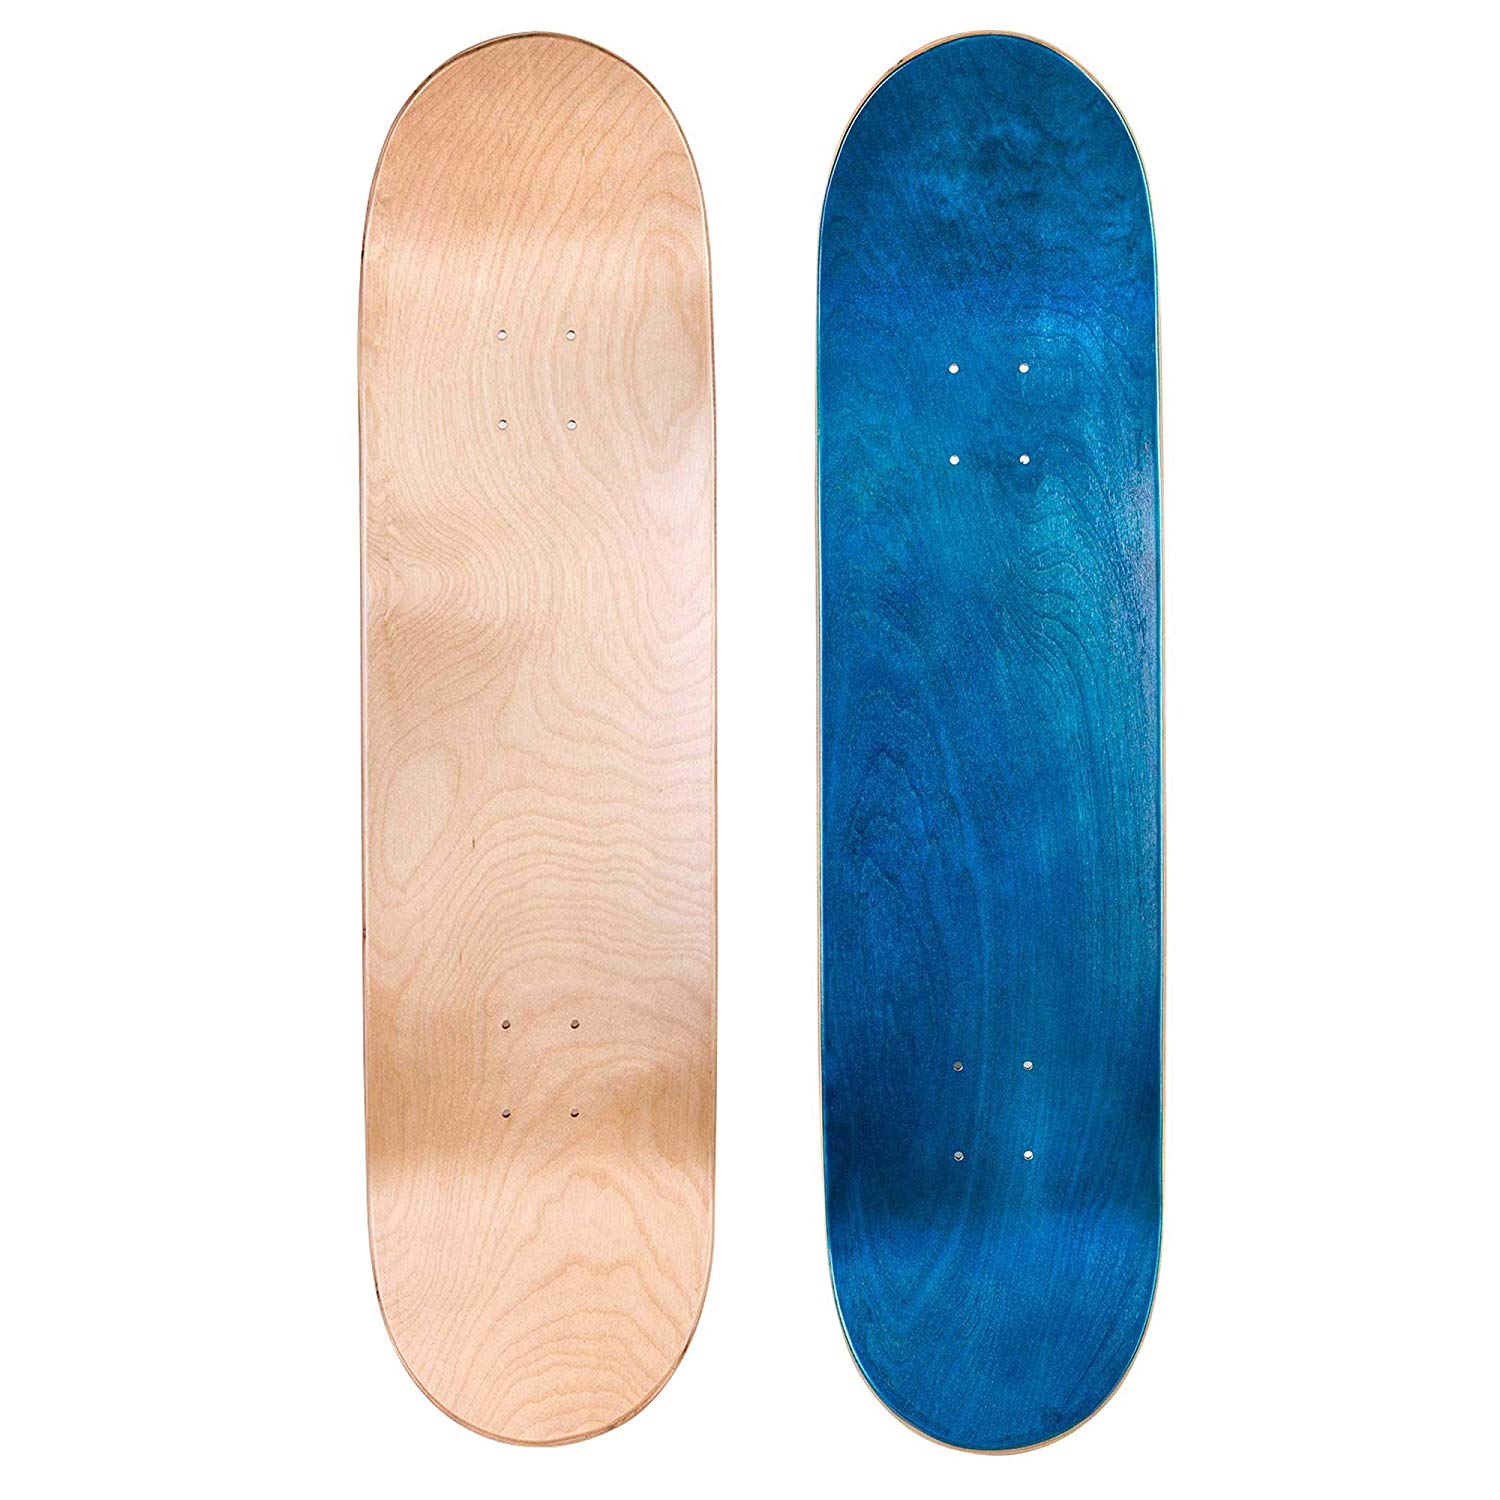 8.0 Two Pack Combinations 8.25 and 8.5 Inch 7.75 Cal 7 Blank Maple Skateboard Decks